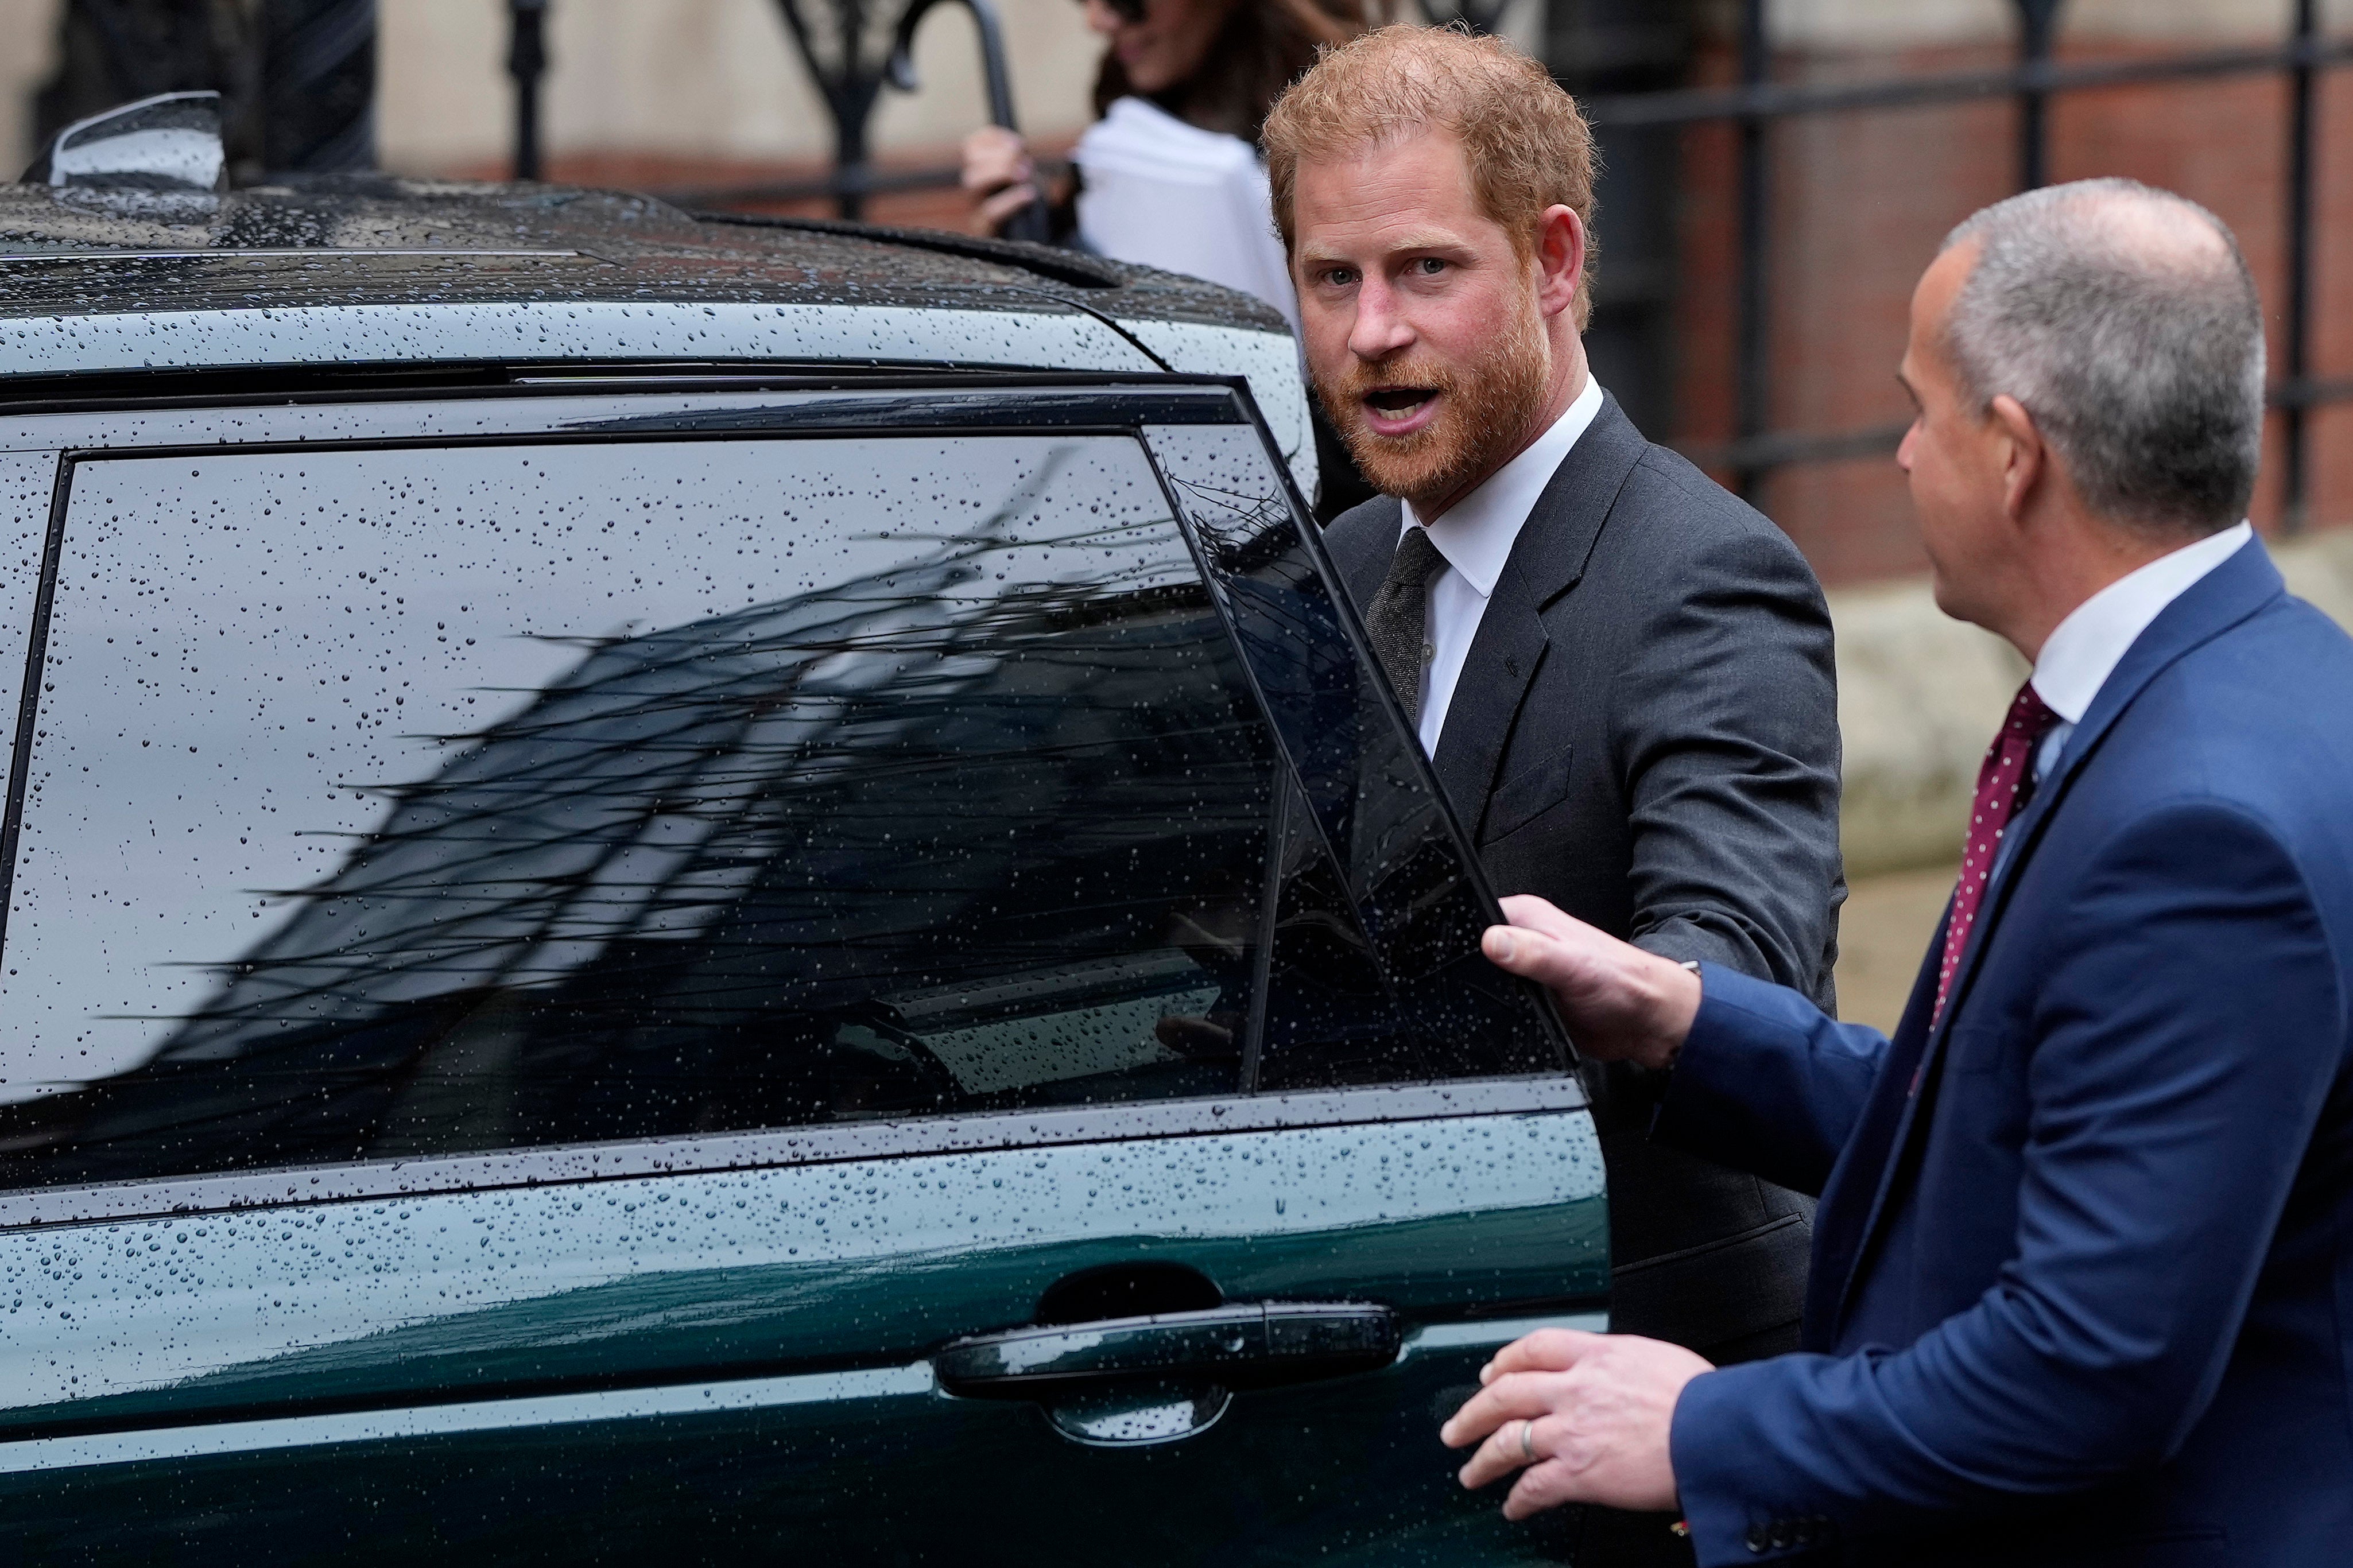 This latest hearing forms part of five ongoing legal battles Prince Harry has in the High Court